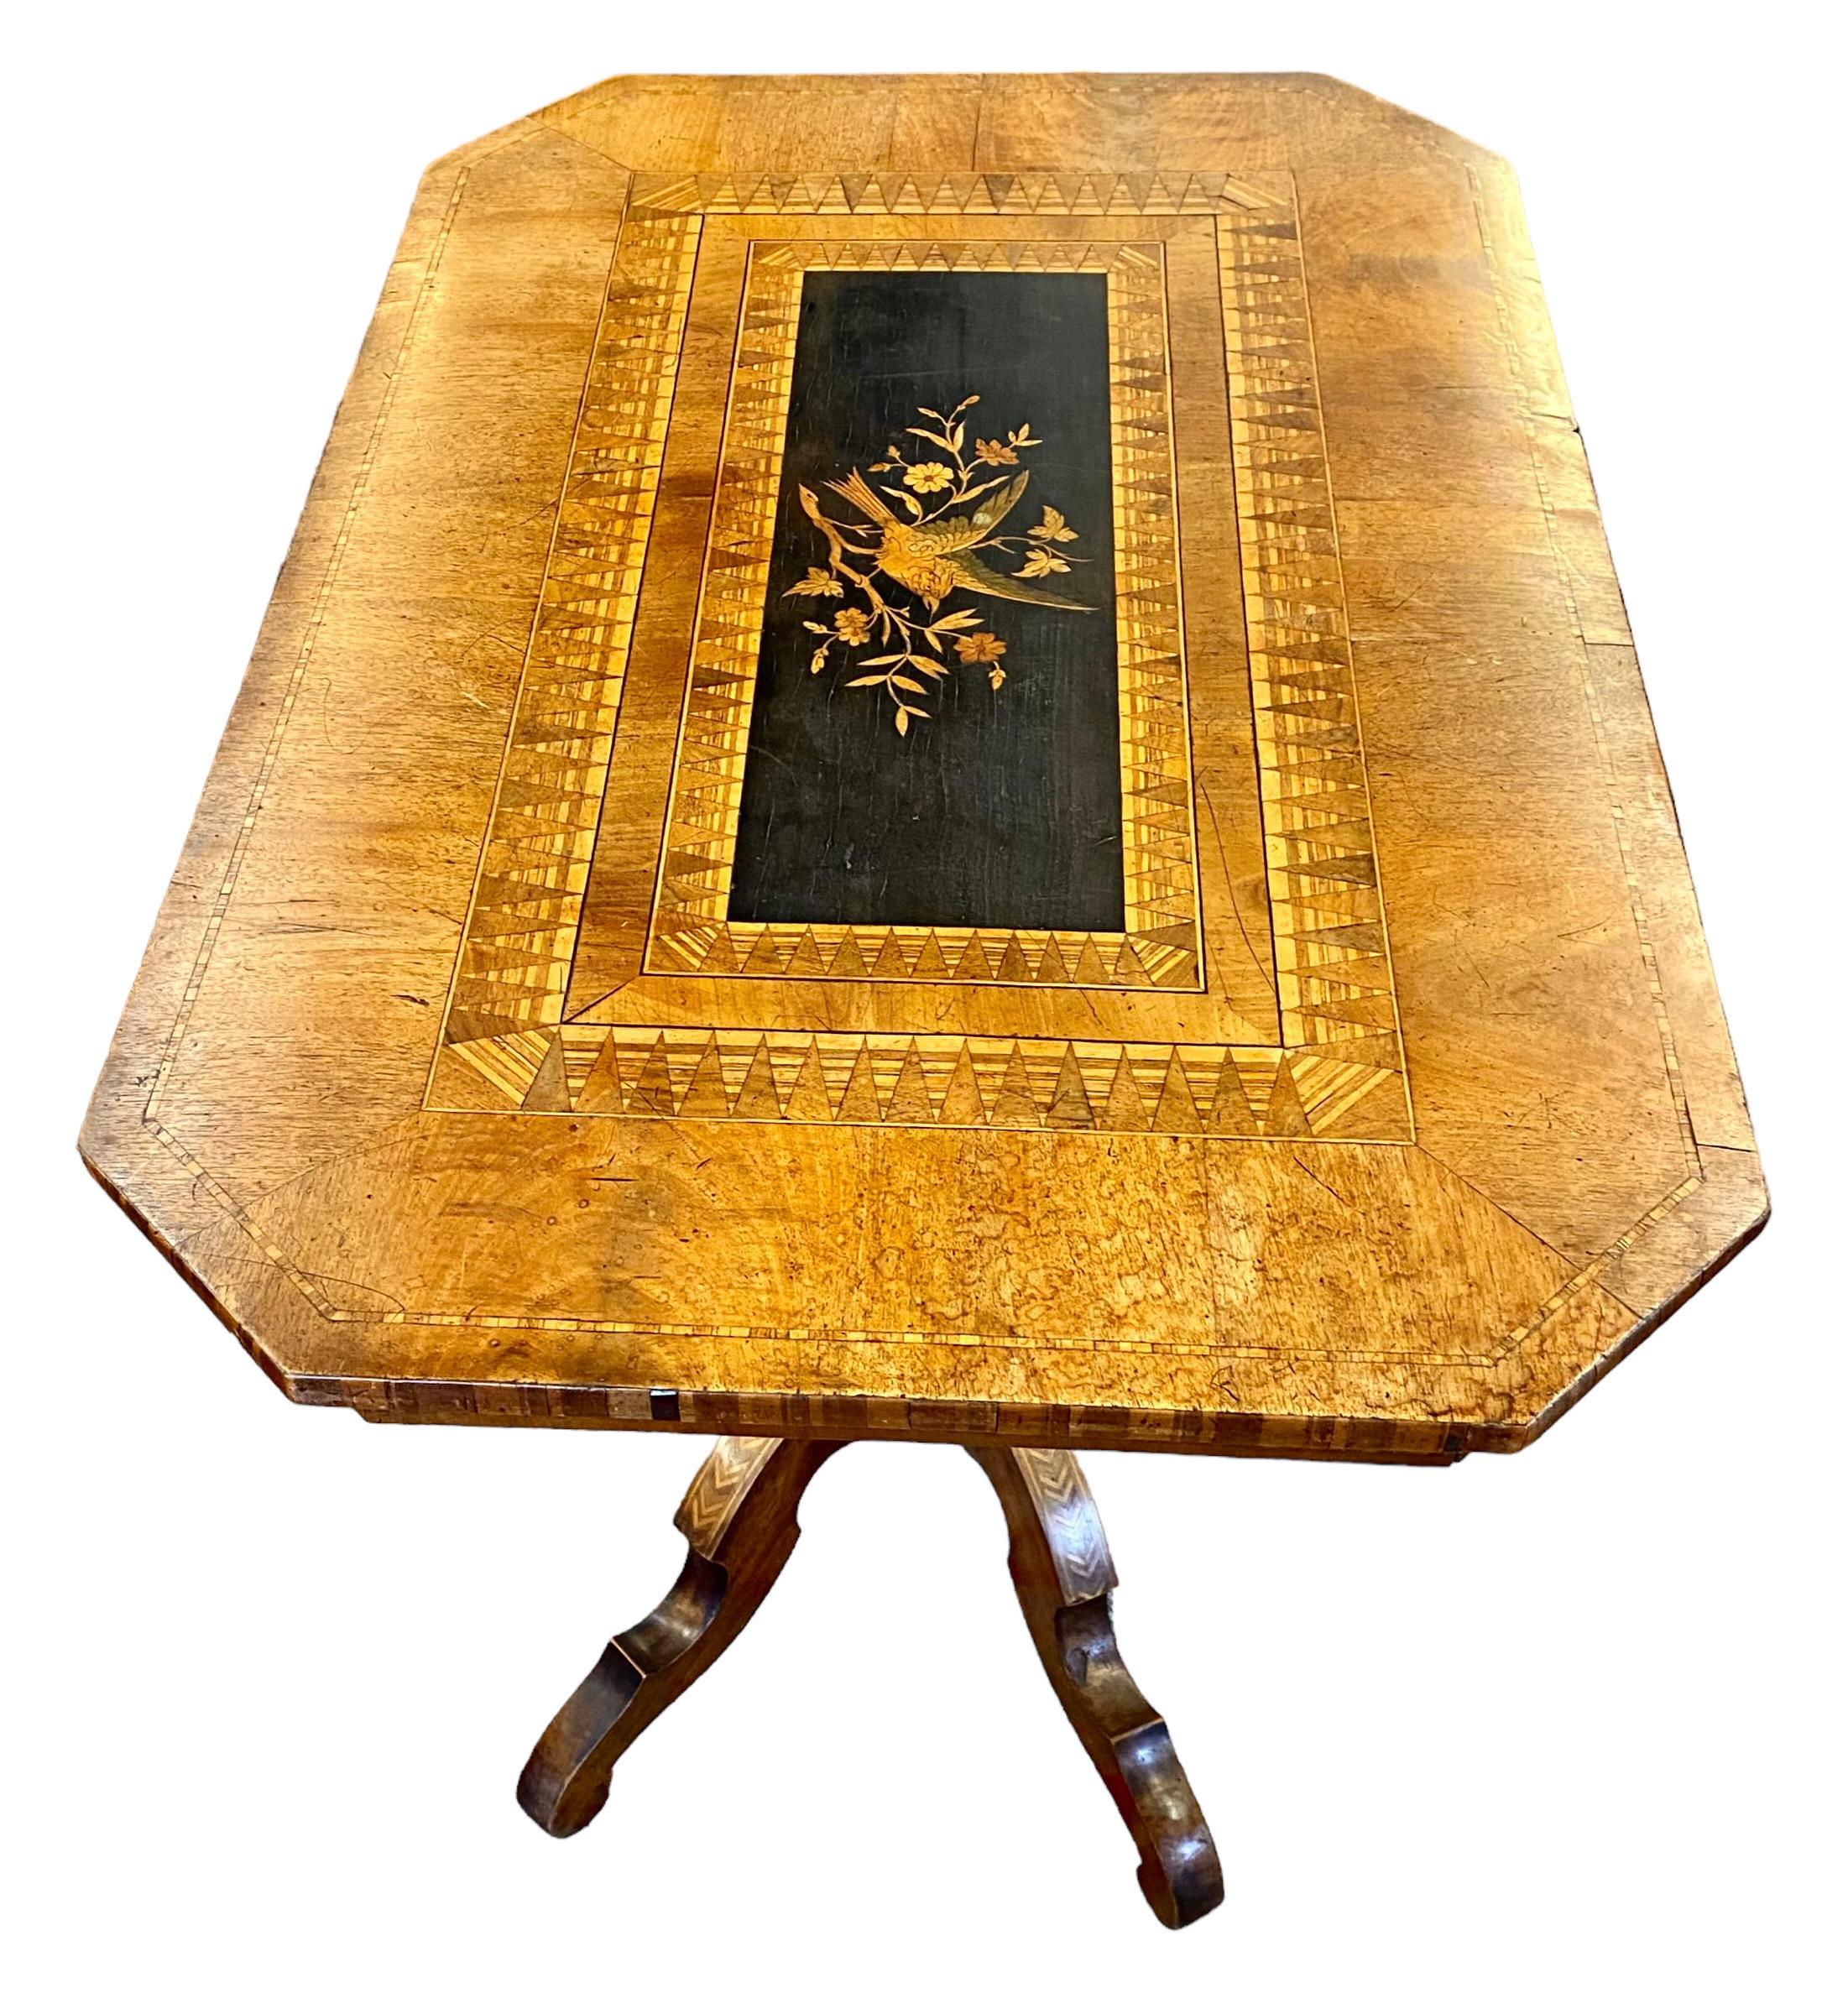 A stunning French marquetry and parquetry inlaid walnut side table, circa 1880, with a center rectangular bird and floral inlaid marquetry panel, flanked by a parquetry inlaid canted top, on a large inlaid turned support, to four inlaid cabriole